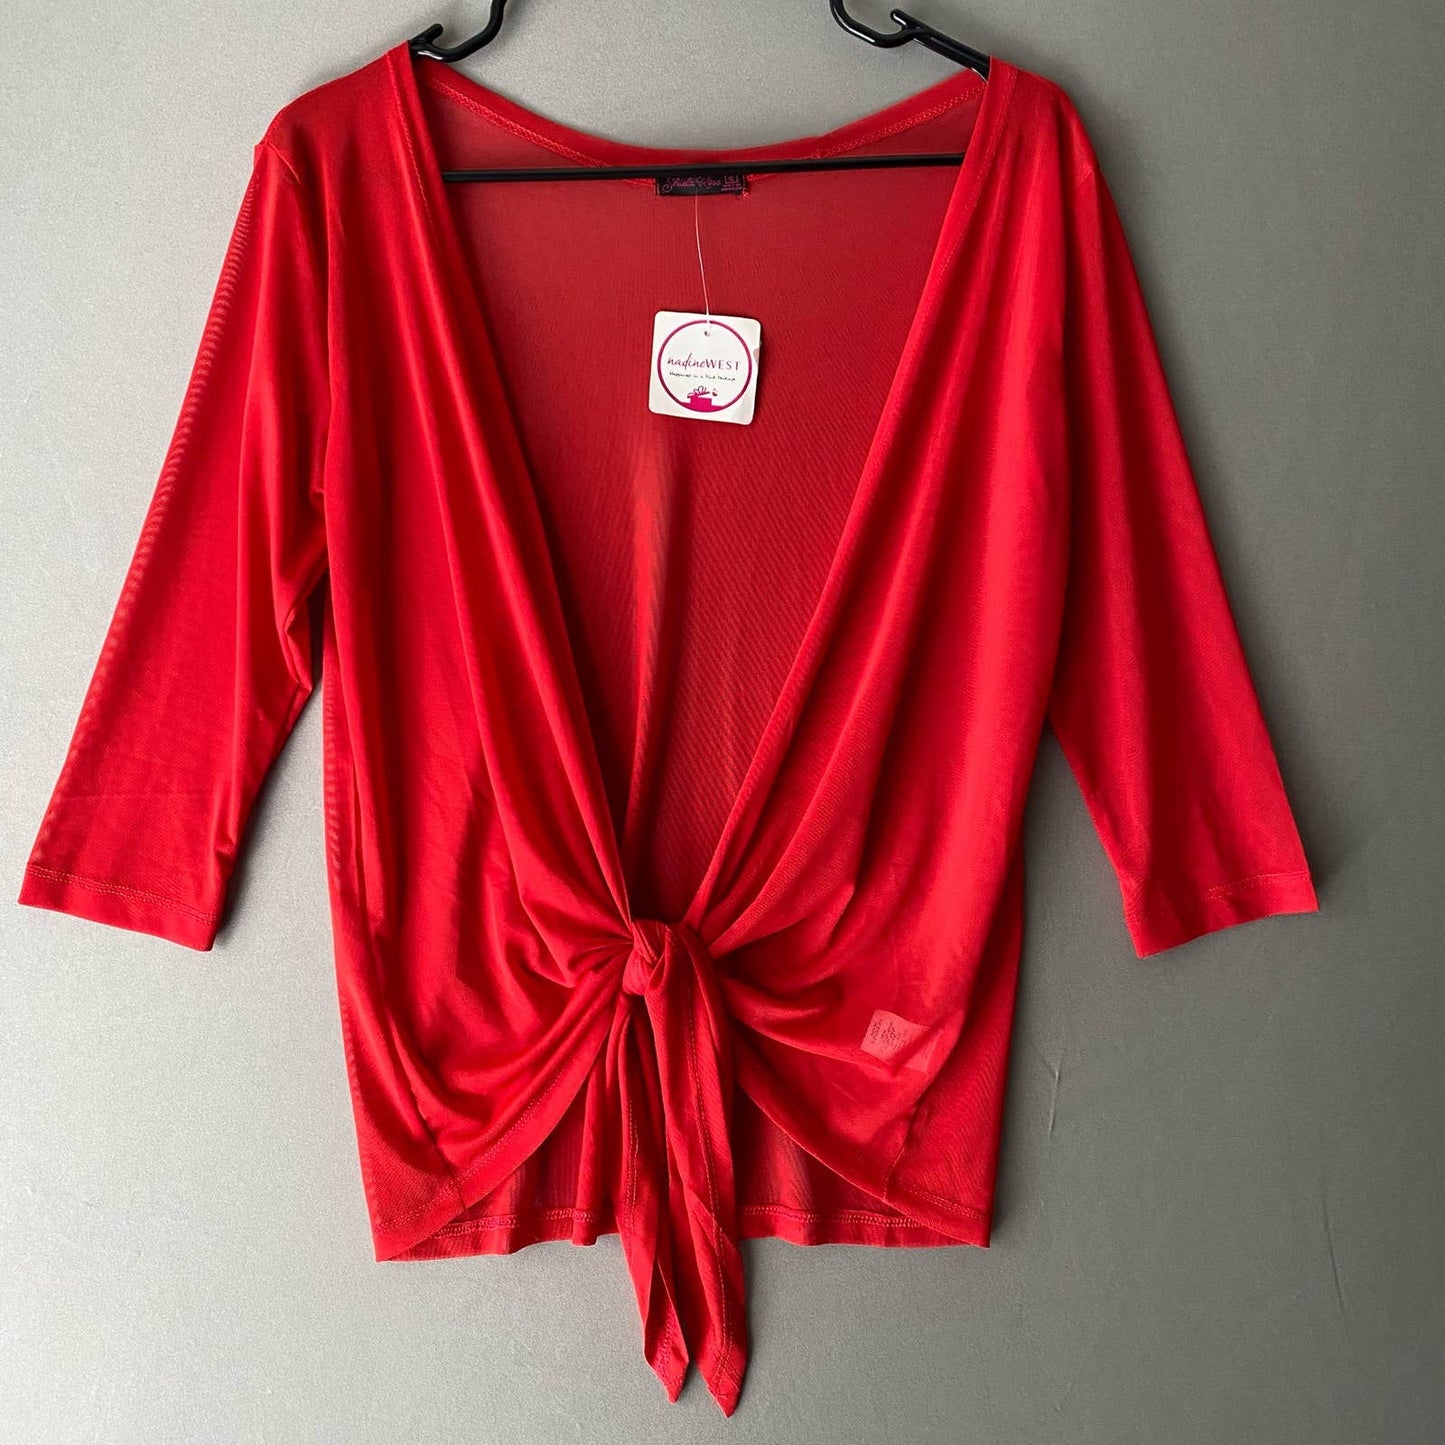 Shiela Rose sz S sheer red open cover up jacket NWT